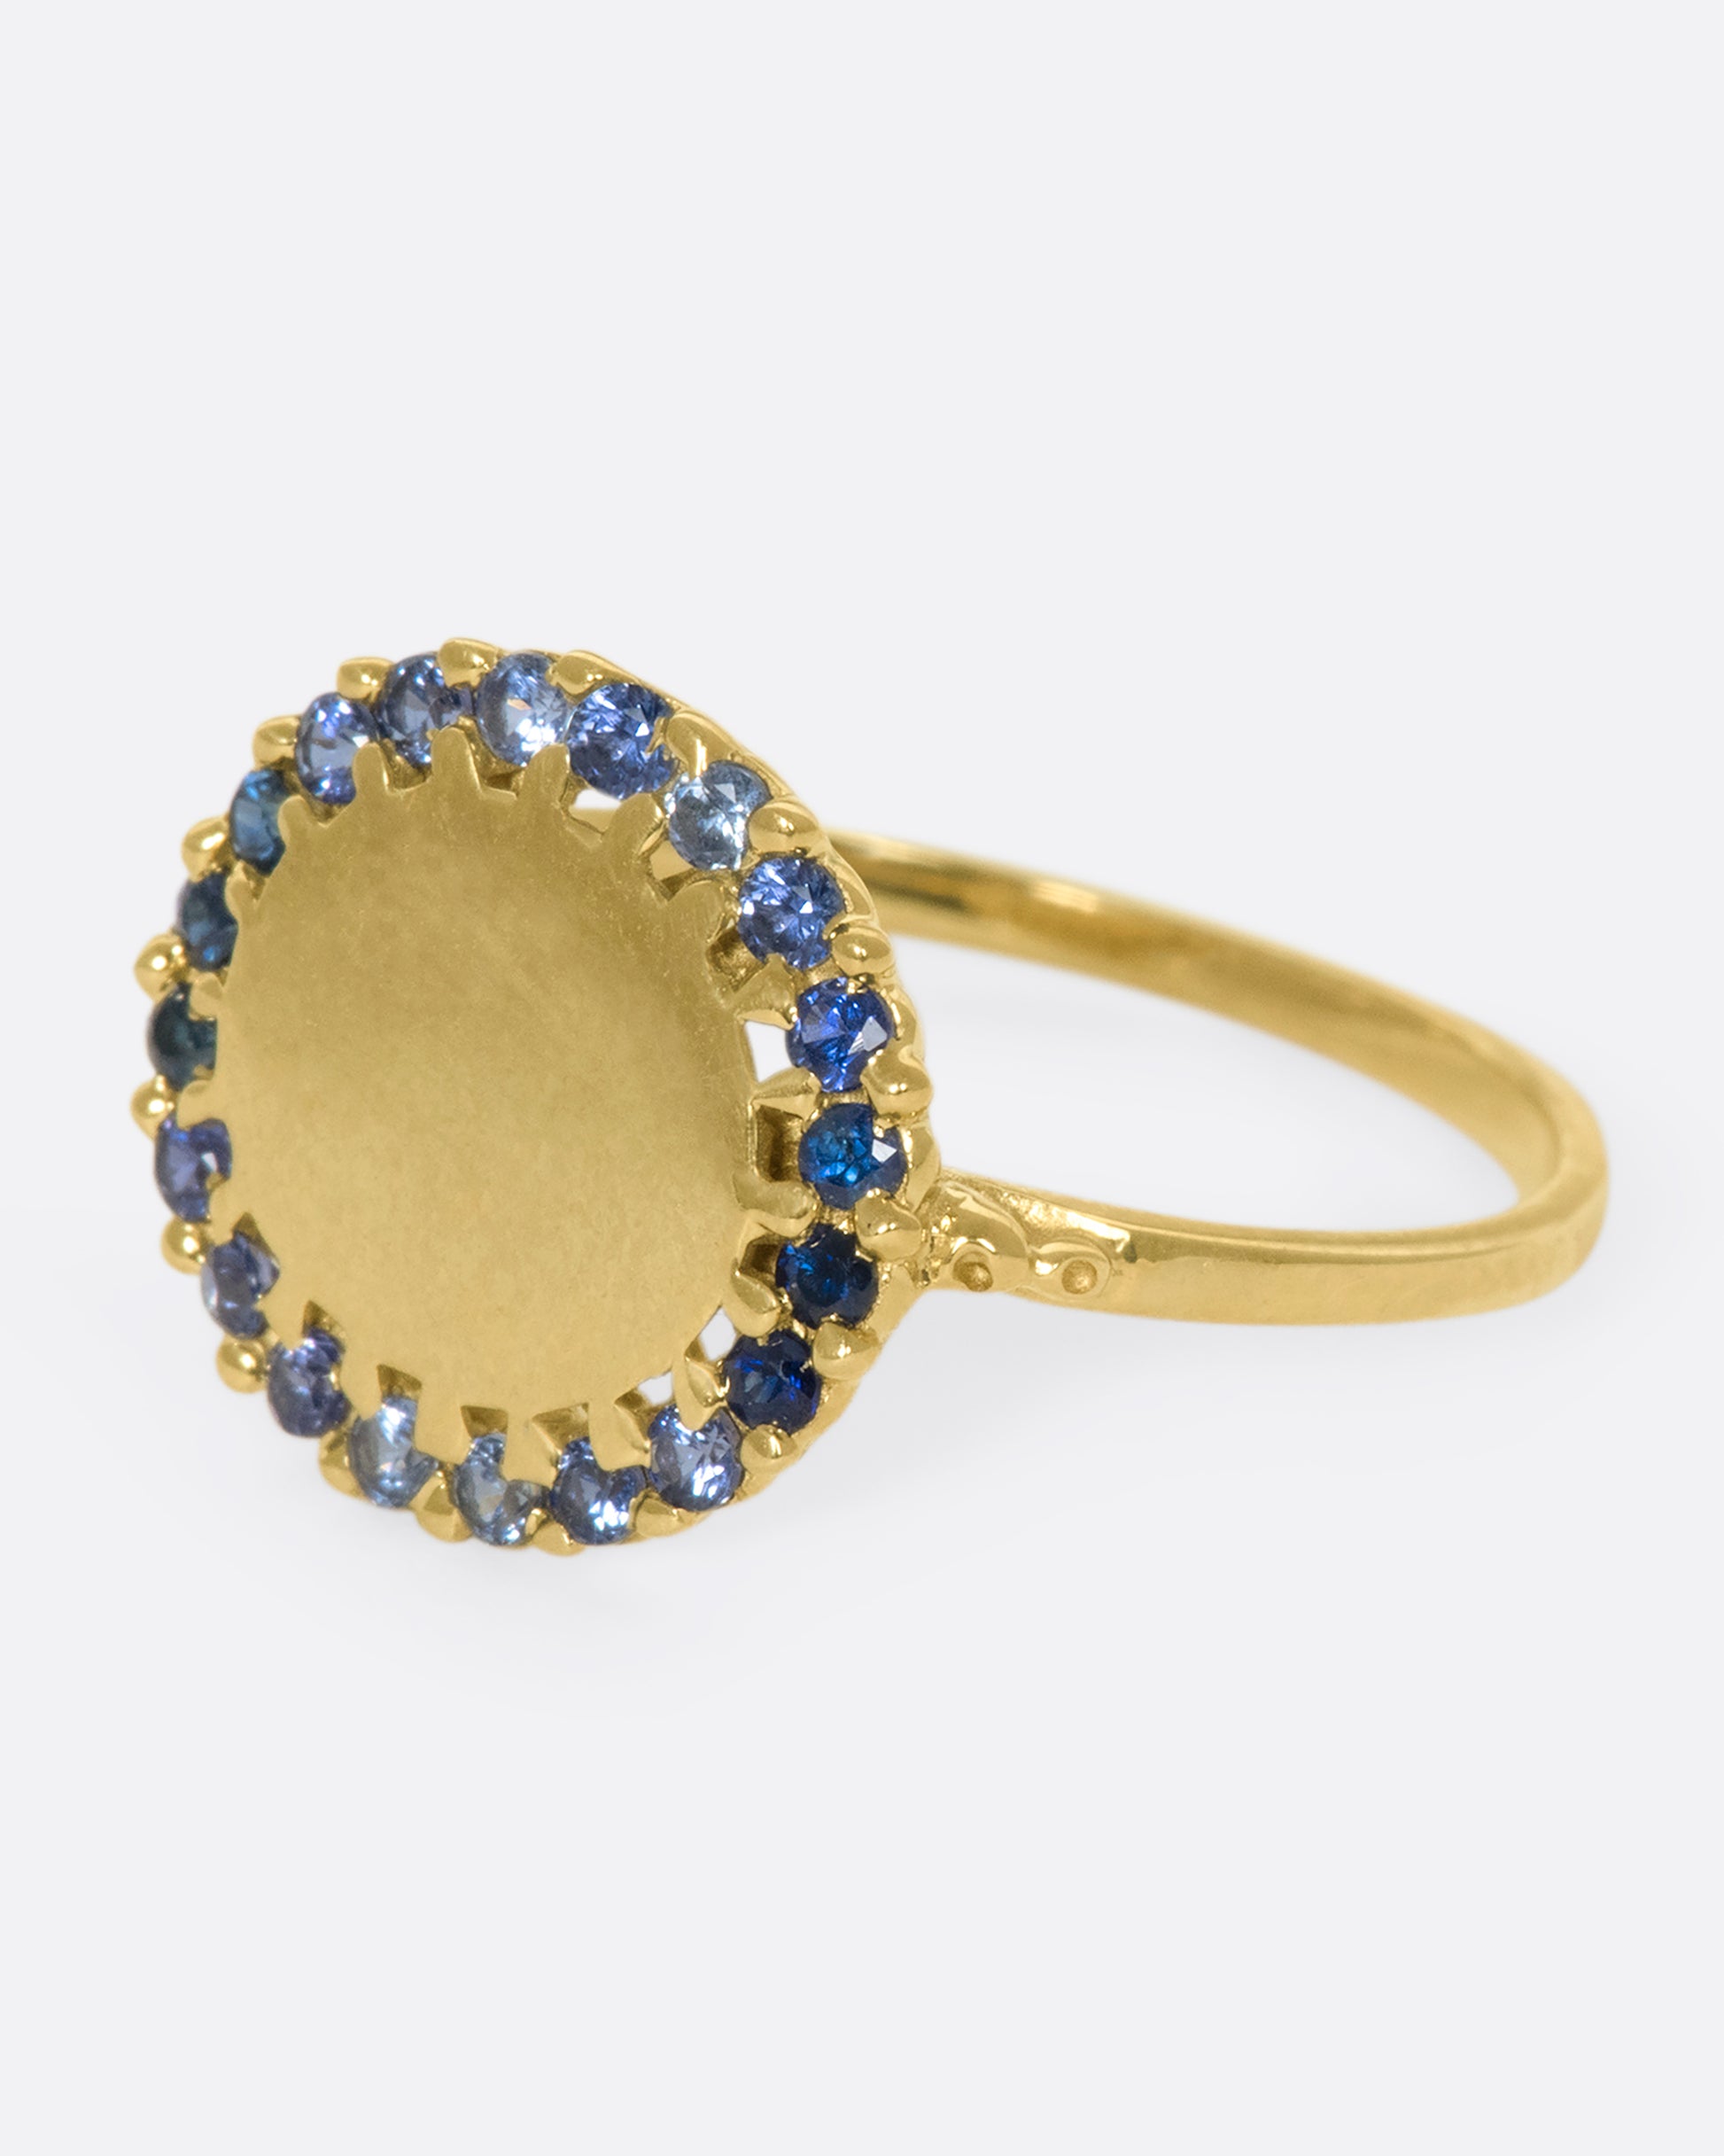 A 14k gold circle ring with a halo of ombré blue sapphires